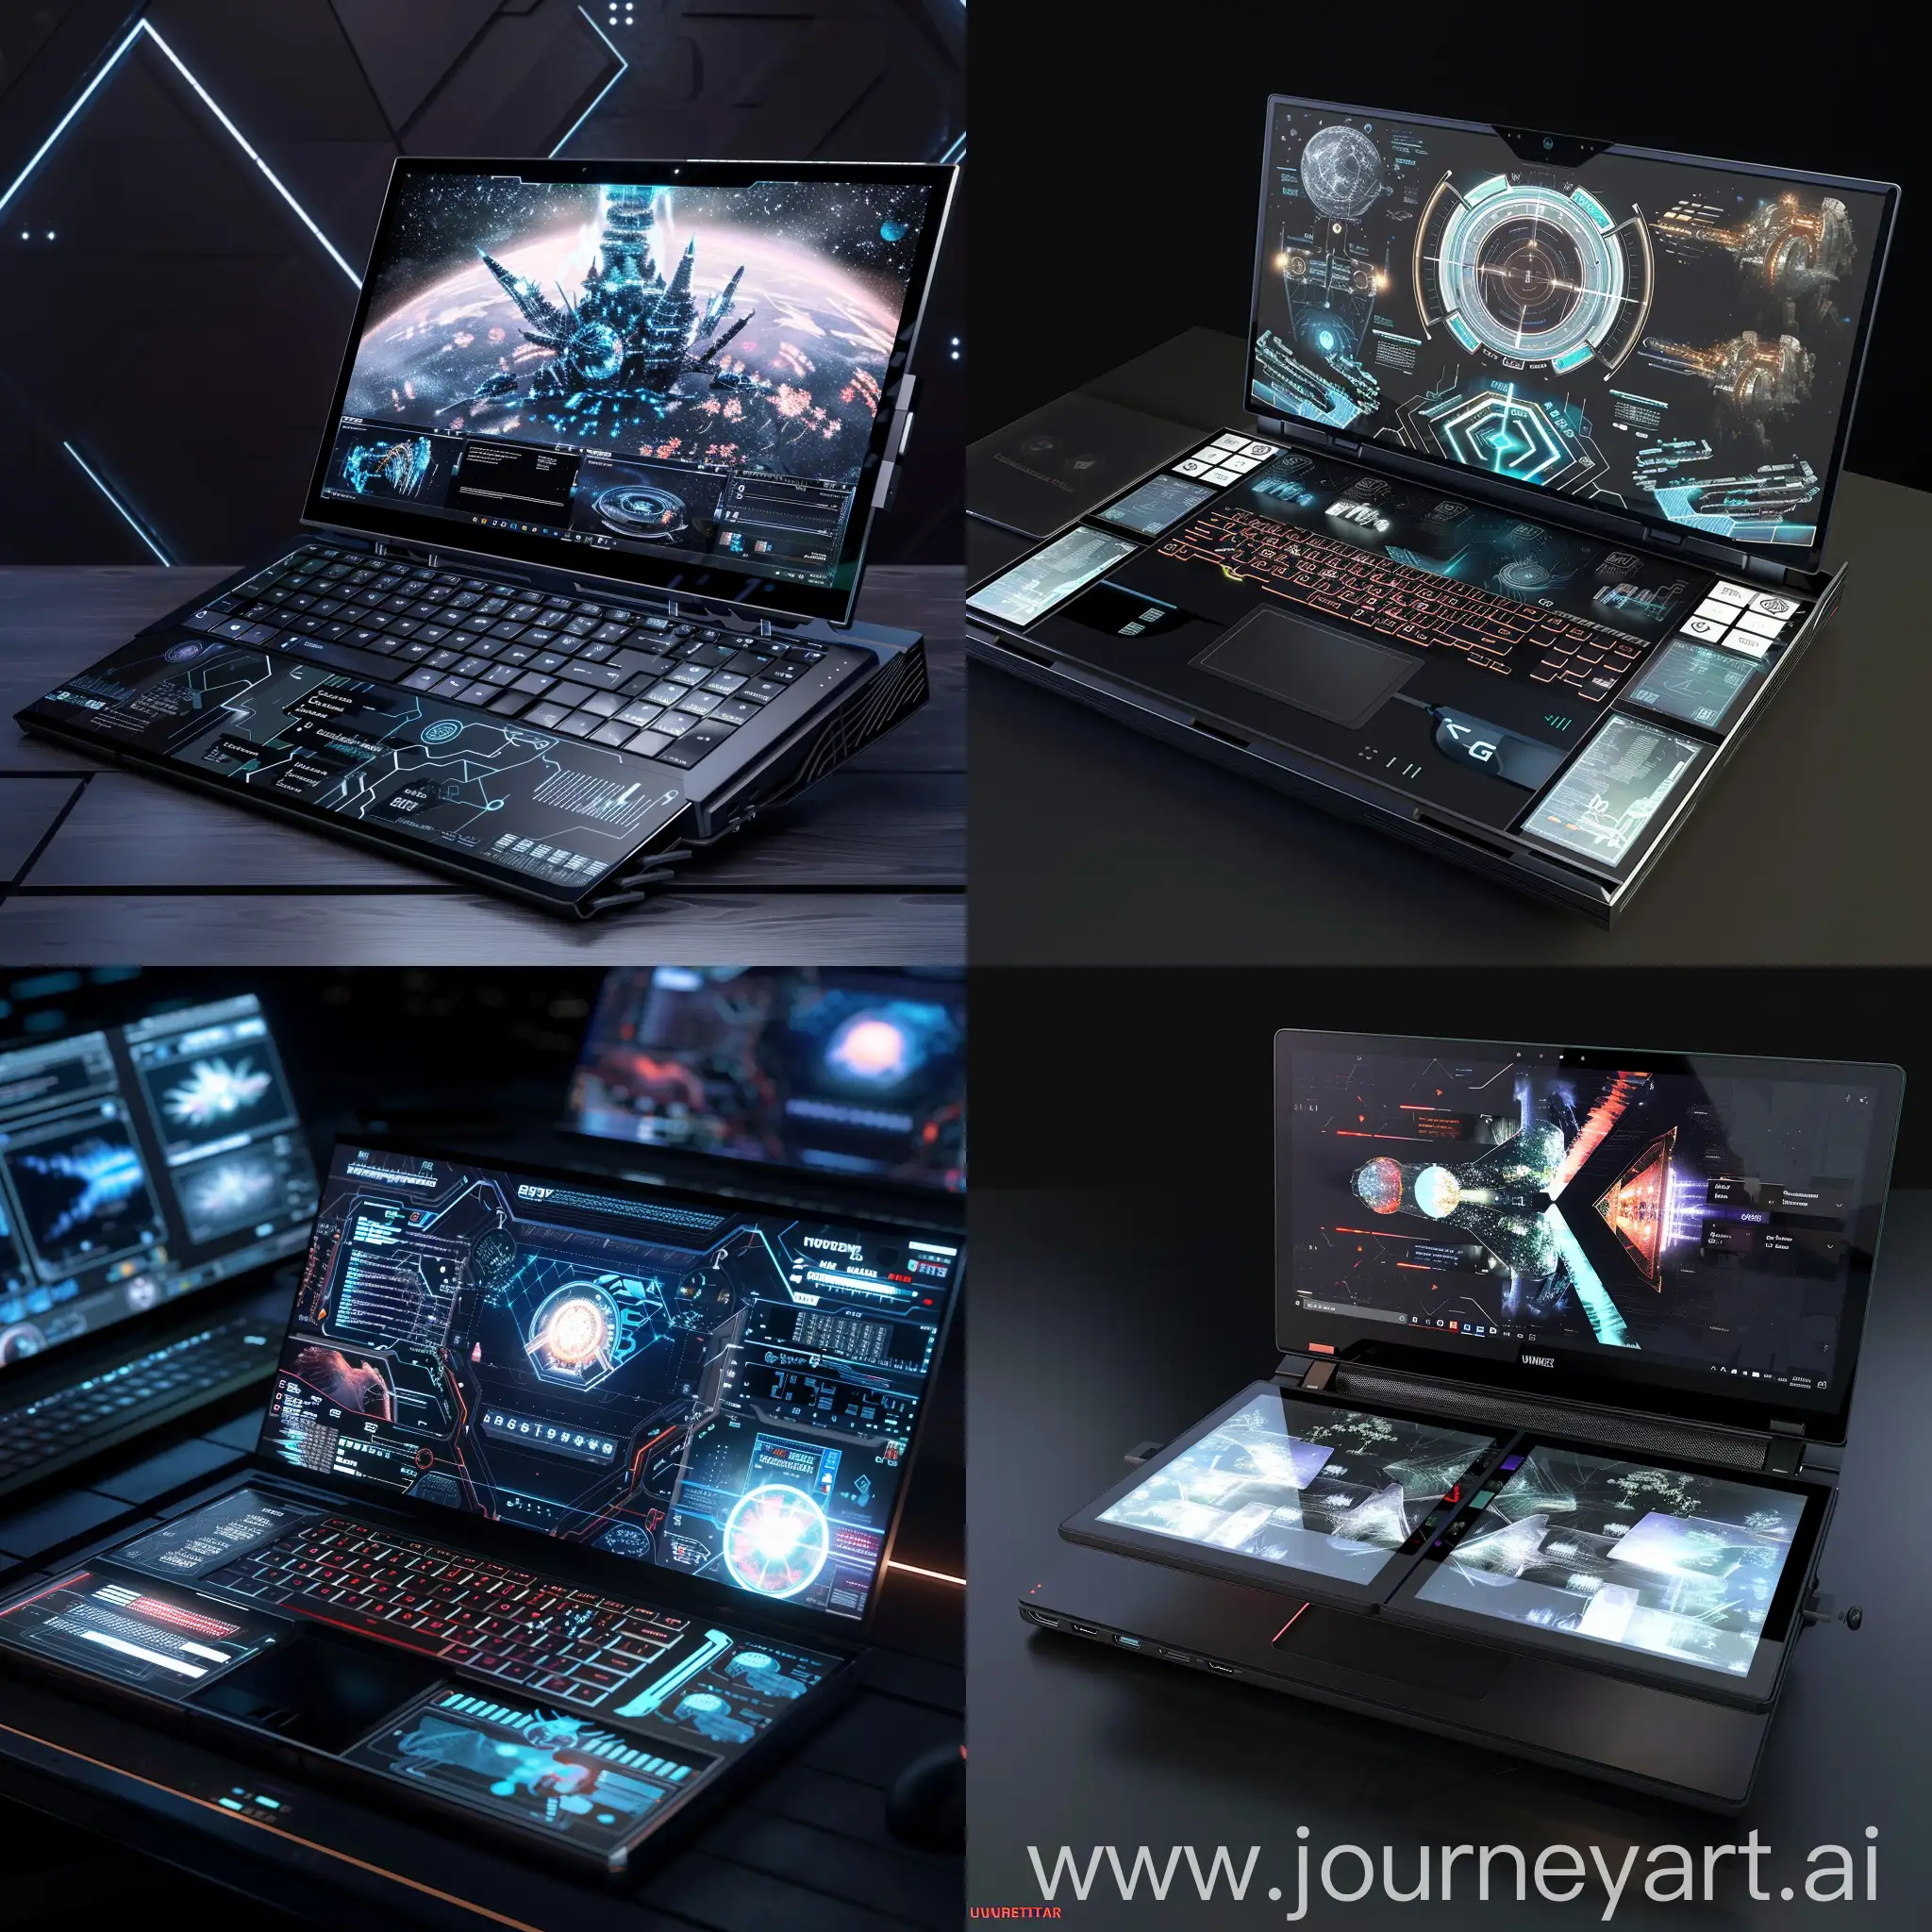 Futuristic laptop, immersive information age, AI-Enhanced CPU, Dual-Screen Designs, OLED Displays, AI-Powered Features, Ultra-High-Definition Graphics, Transparent Displays, Enhanced Connectivity, Sustainable Materials, Advanced Cooling Systems, Long Battery Life and Fast Charging, 4K and 8K Displays, HDR Support, High Refresh Rates, Immersive Audio, VR and AR Capabilities, Edge-to-Edge Displays, Haptic Feedback Touchpads, AI-Powered Touch and Gesture Controls, Integrated Eye-Tracking, Enhanced Webcam and Microphone Systems, Transparent Displays, Dual-Screen Configurations, Edge-to-Edge Displays, Flexible and Foldable Screens, Haptic Feedback Touchpads, Ultra-Thin Profiles, Premium Materials, Capacitive Touch Function Keys, High-Resolution Cameras, RGB and Customizable Lighting, 4K and 8K Displays, HDR Support, High Refresh Rates, 360-Degree Hinge Designs, Integrated VR and AR Support, Advanced Audio System, Touch and Stylus Input, G-Sync and FreeSync Technology, Eye-Tracking Technology, Enhanced Connectivity Options, unreal engine 5 --stylize 1000